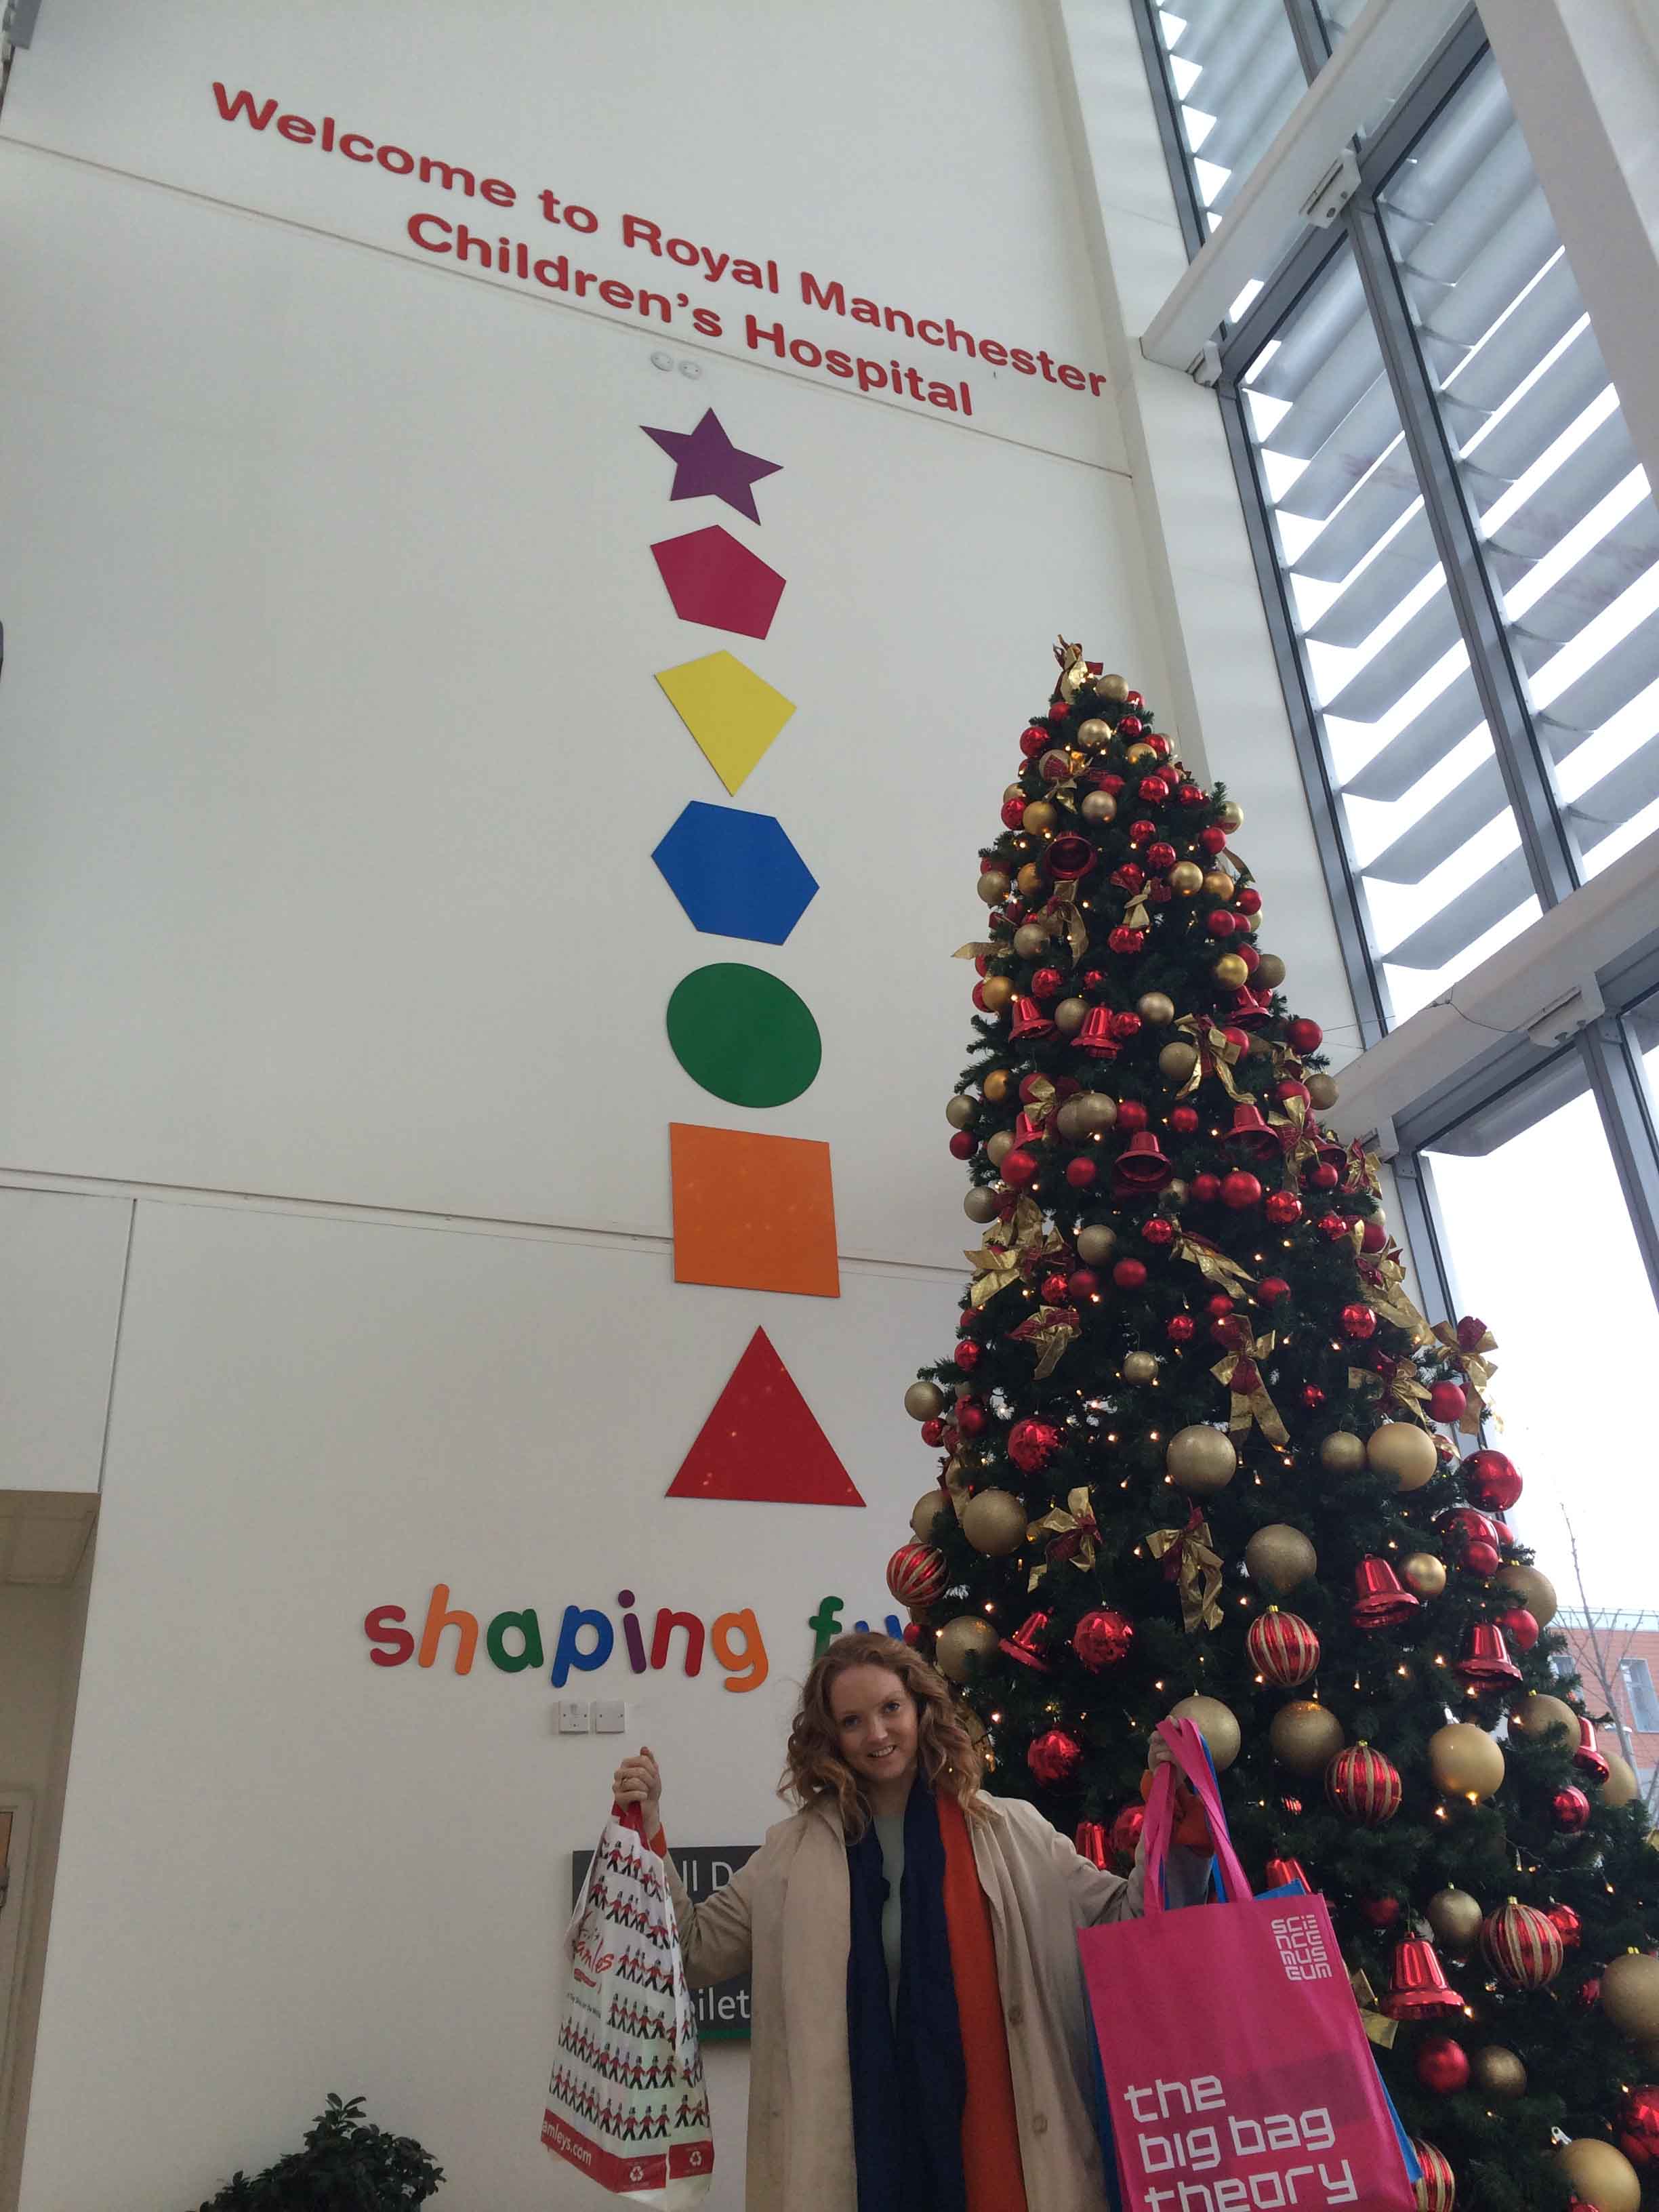 Lily Cole delivering Science Museum presents to Manchester Children's Hospital for her impossible project. Image credit: Lily Cole